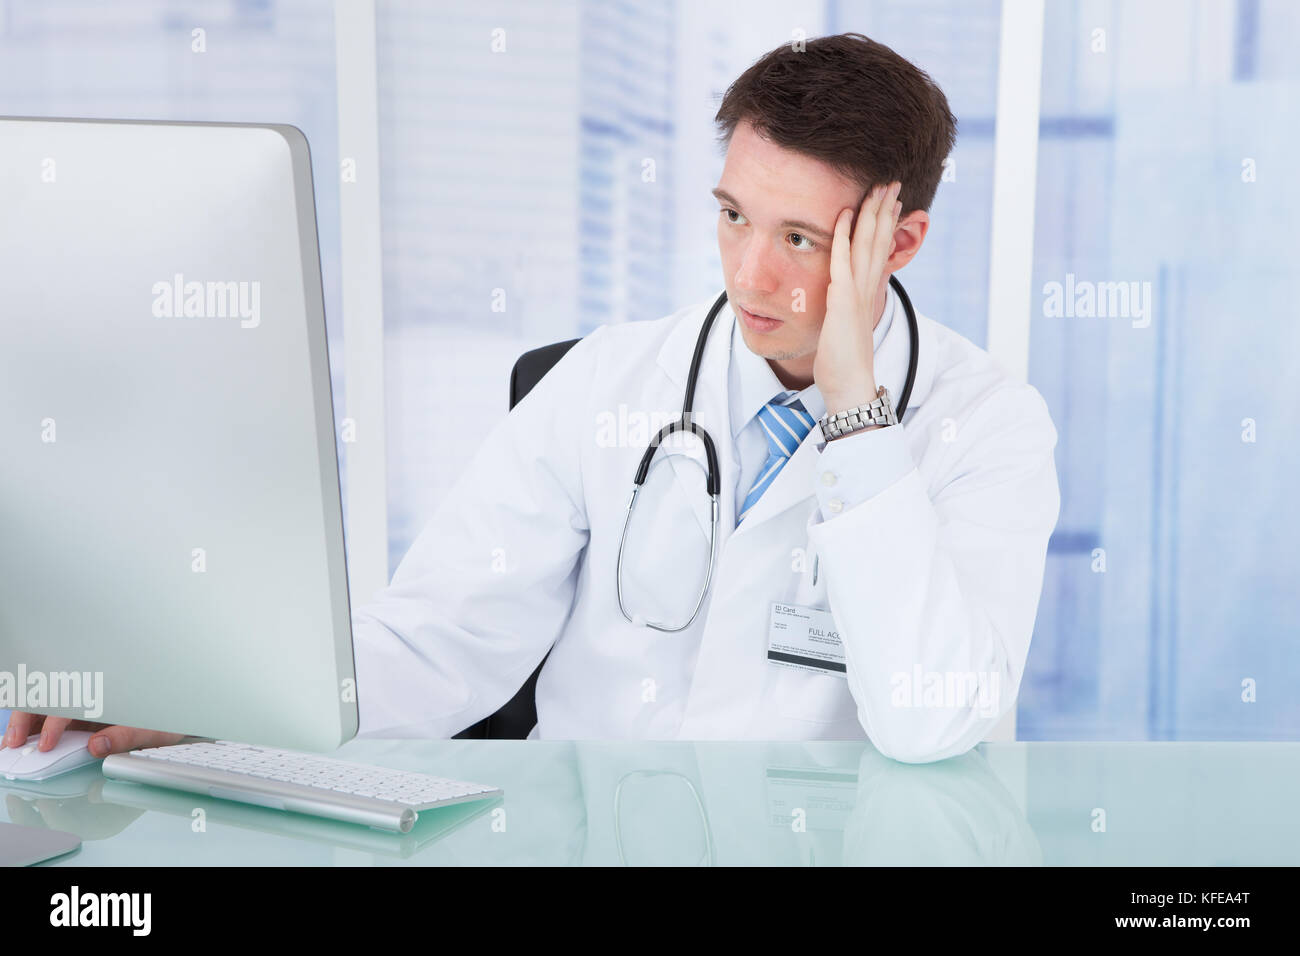 Worried young male doctor using computer at desk in hospital Stock Photo